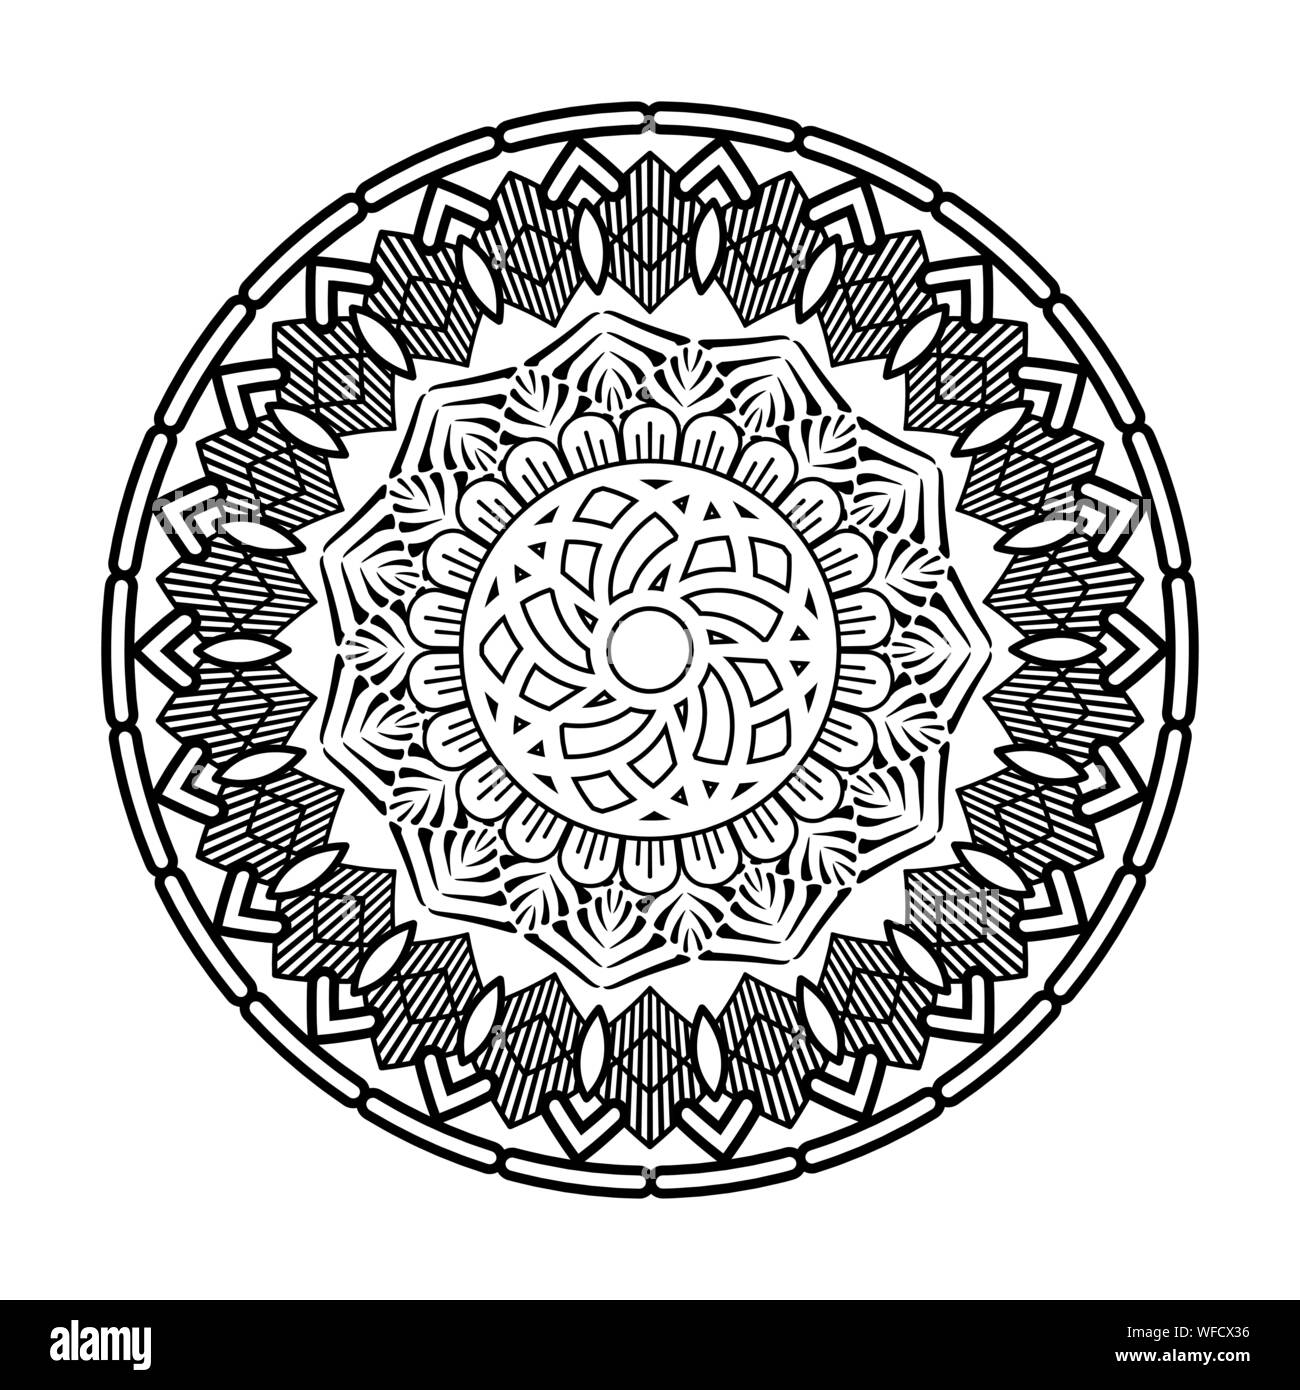 Flower mandala vector illustration. Adult coloring page. Circular abstract floral oriental pattern, vintage decorative elements. Isolated on white background Stock Vector